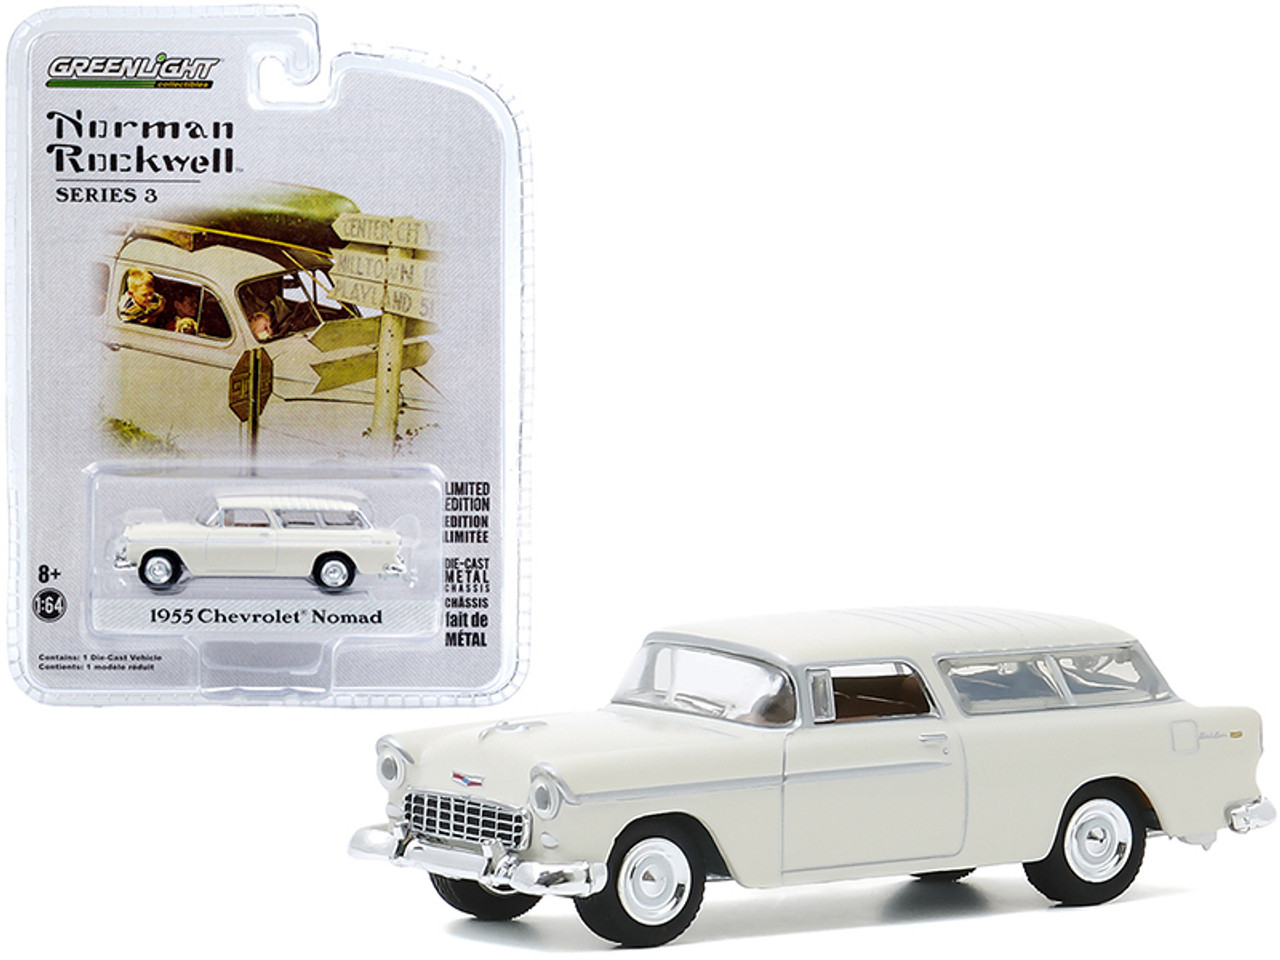 1955 Chevrolet Nomad Cream "Norman Rockwell" Series 3 1/64 Diecast Model Car by Greenlight